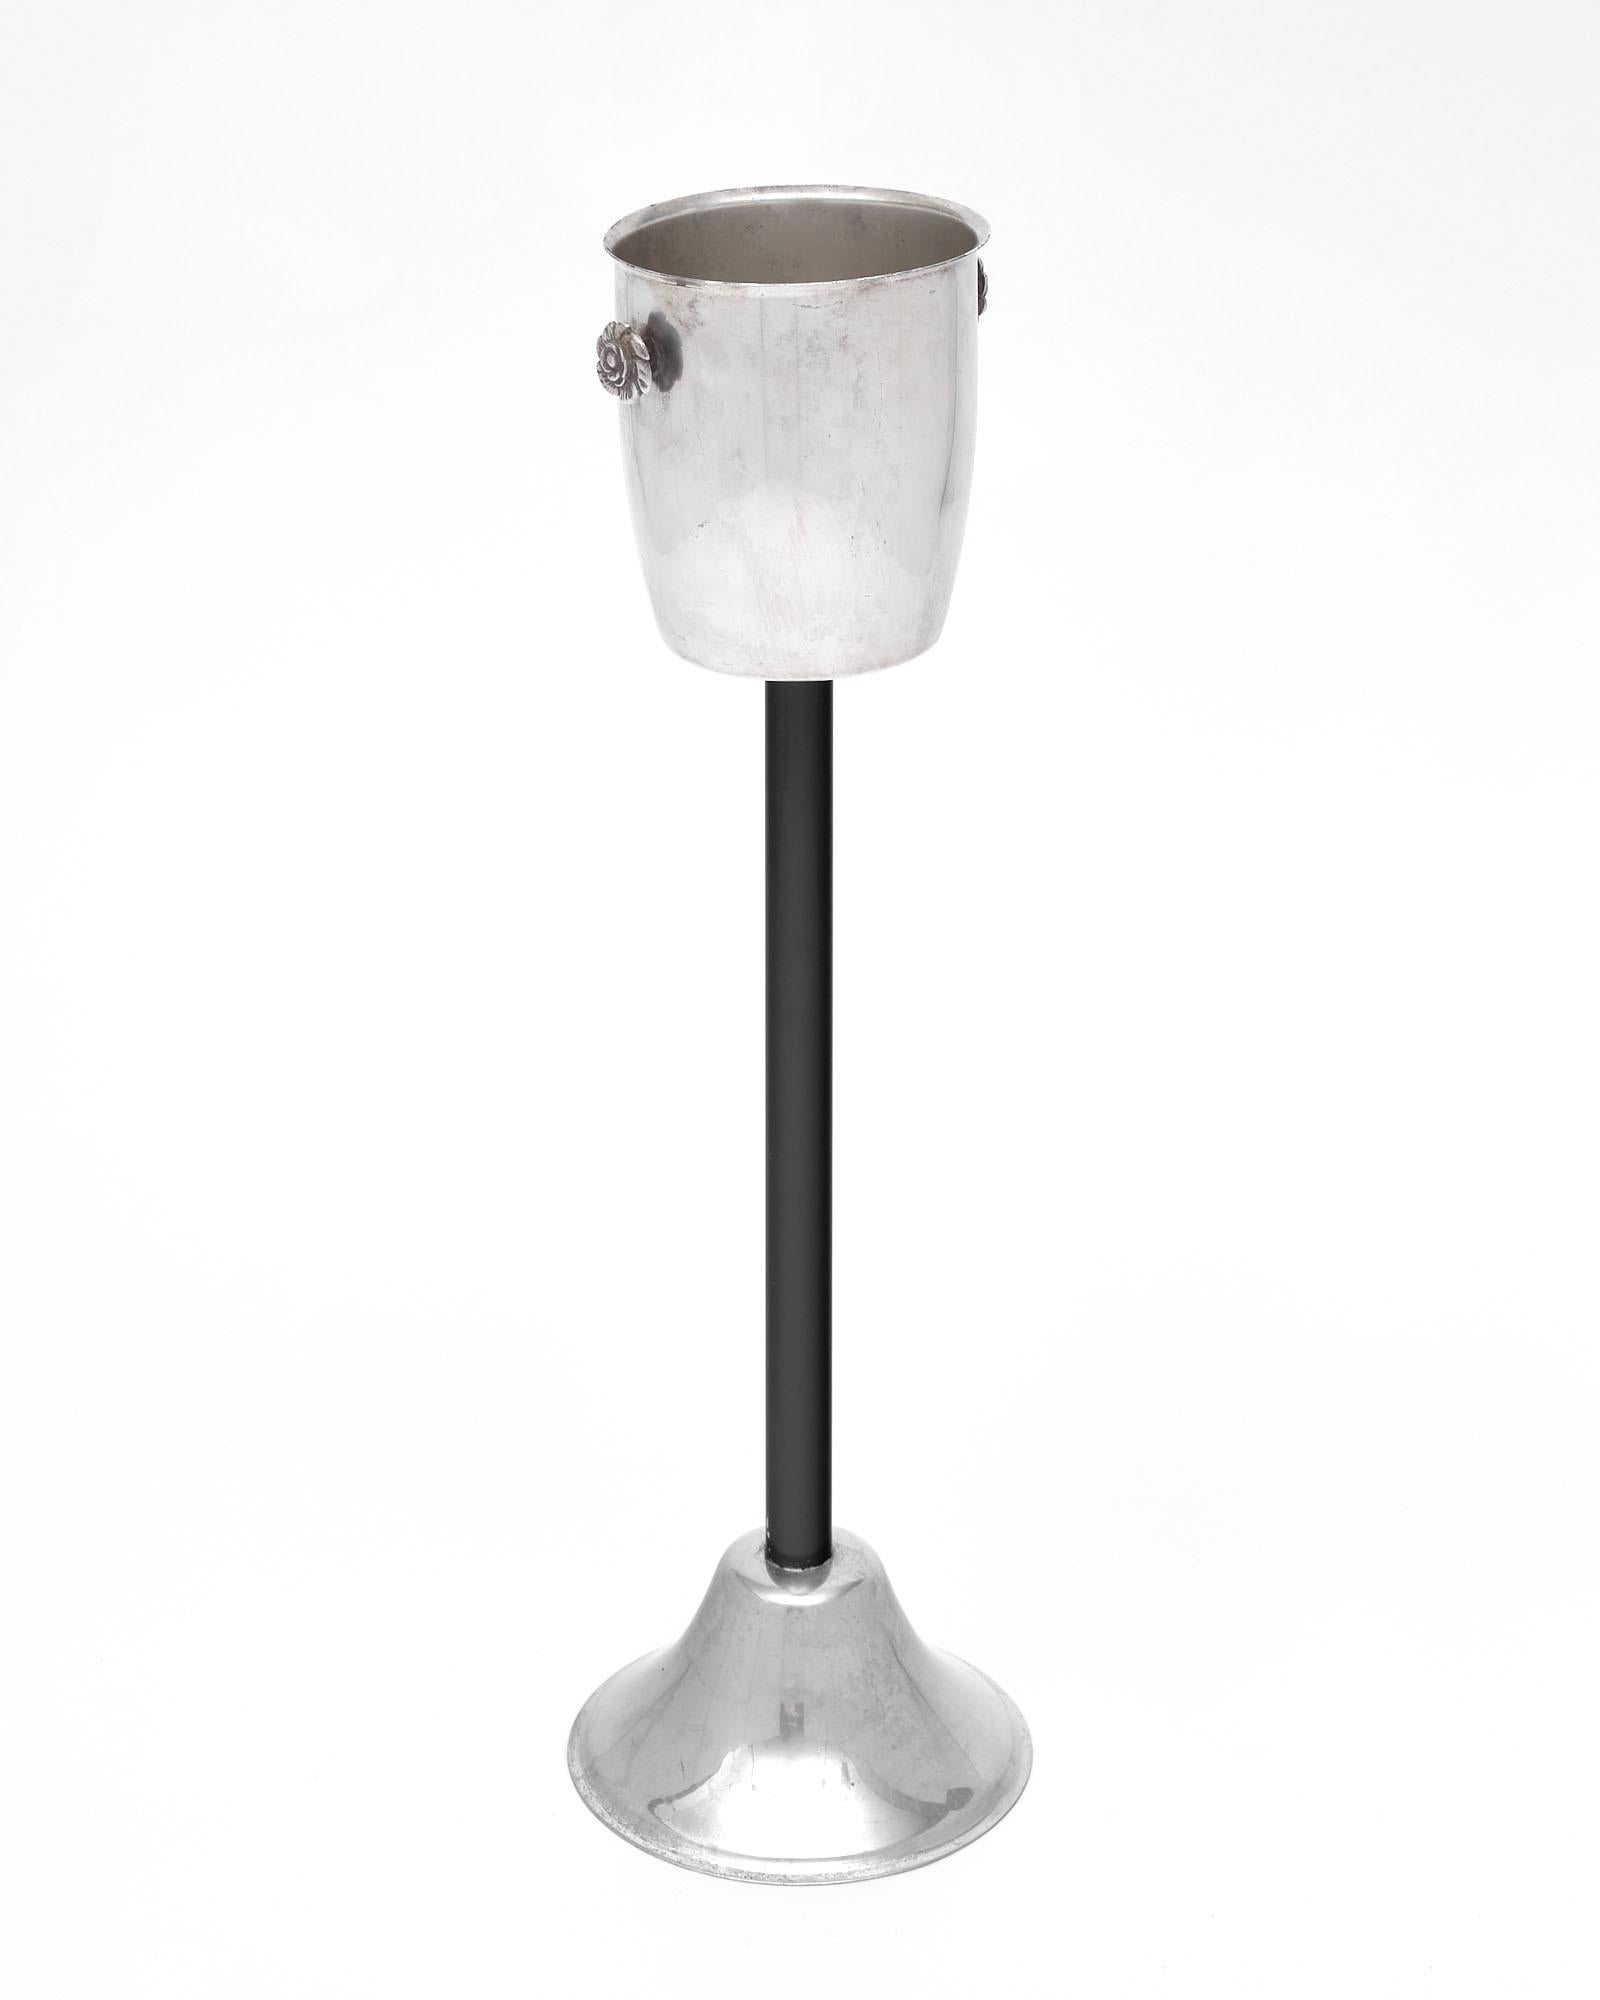 French champagne bucket on stand. This piece features a silver plated bucket sitting on a black lacquered stand.